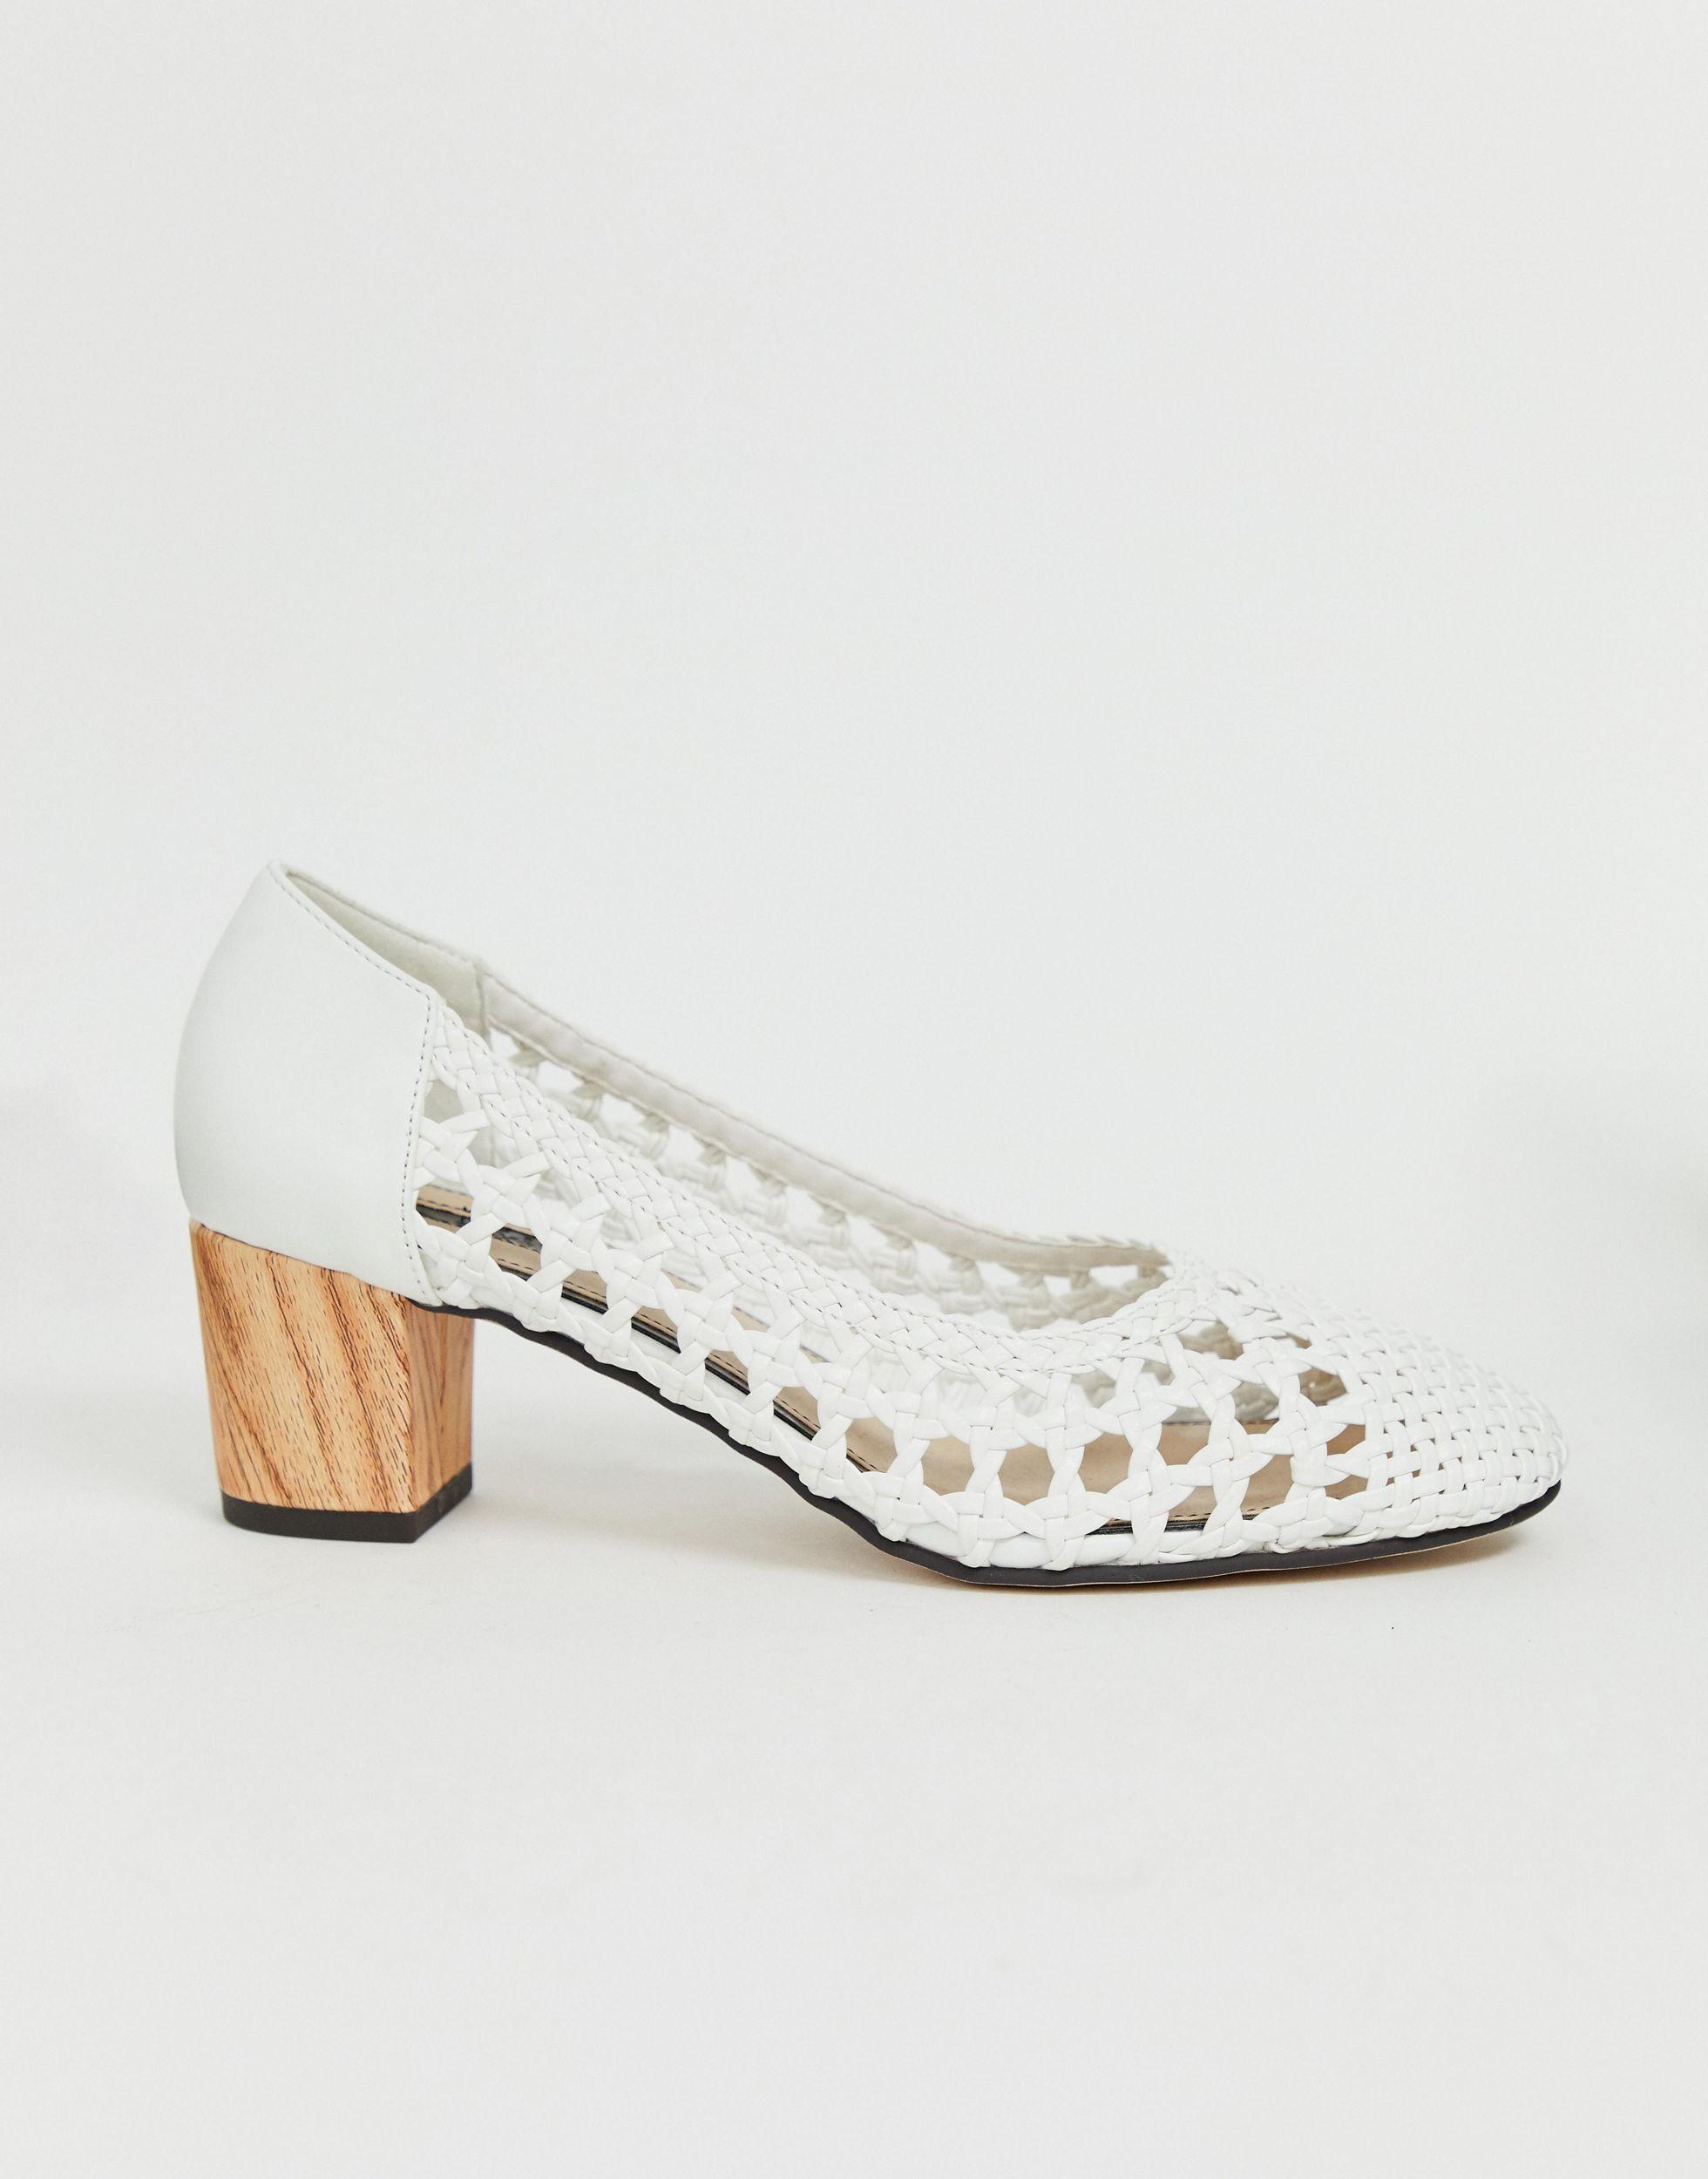 Miss Selfridge Clementine White Woven Court Shoes | Lyst